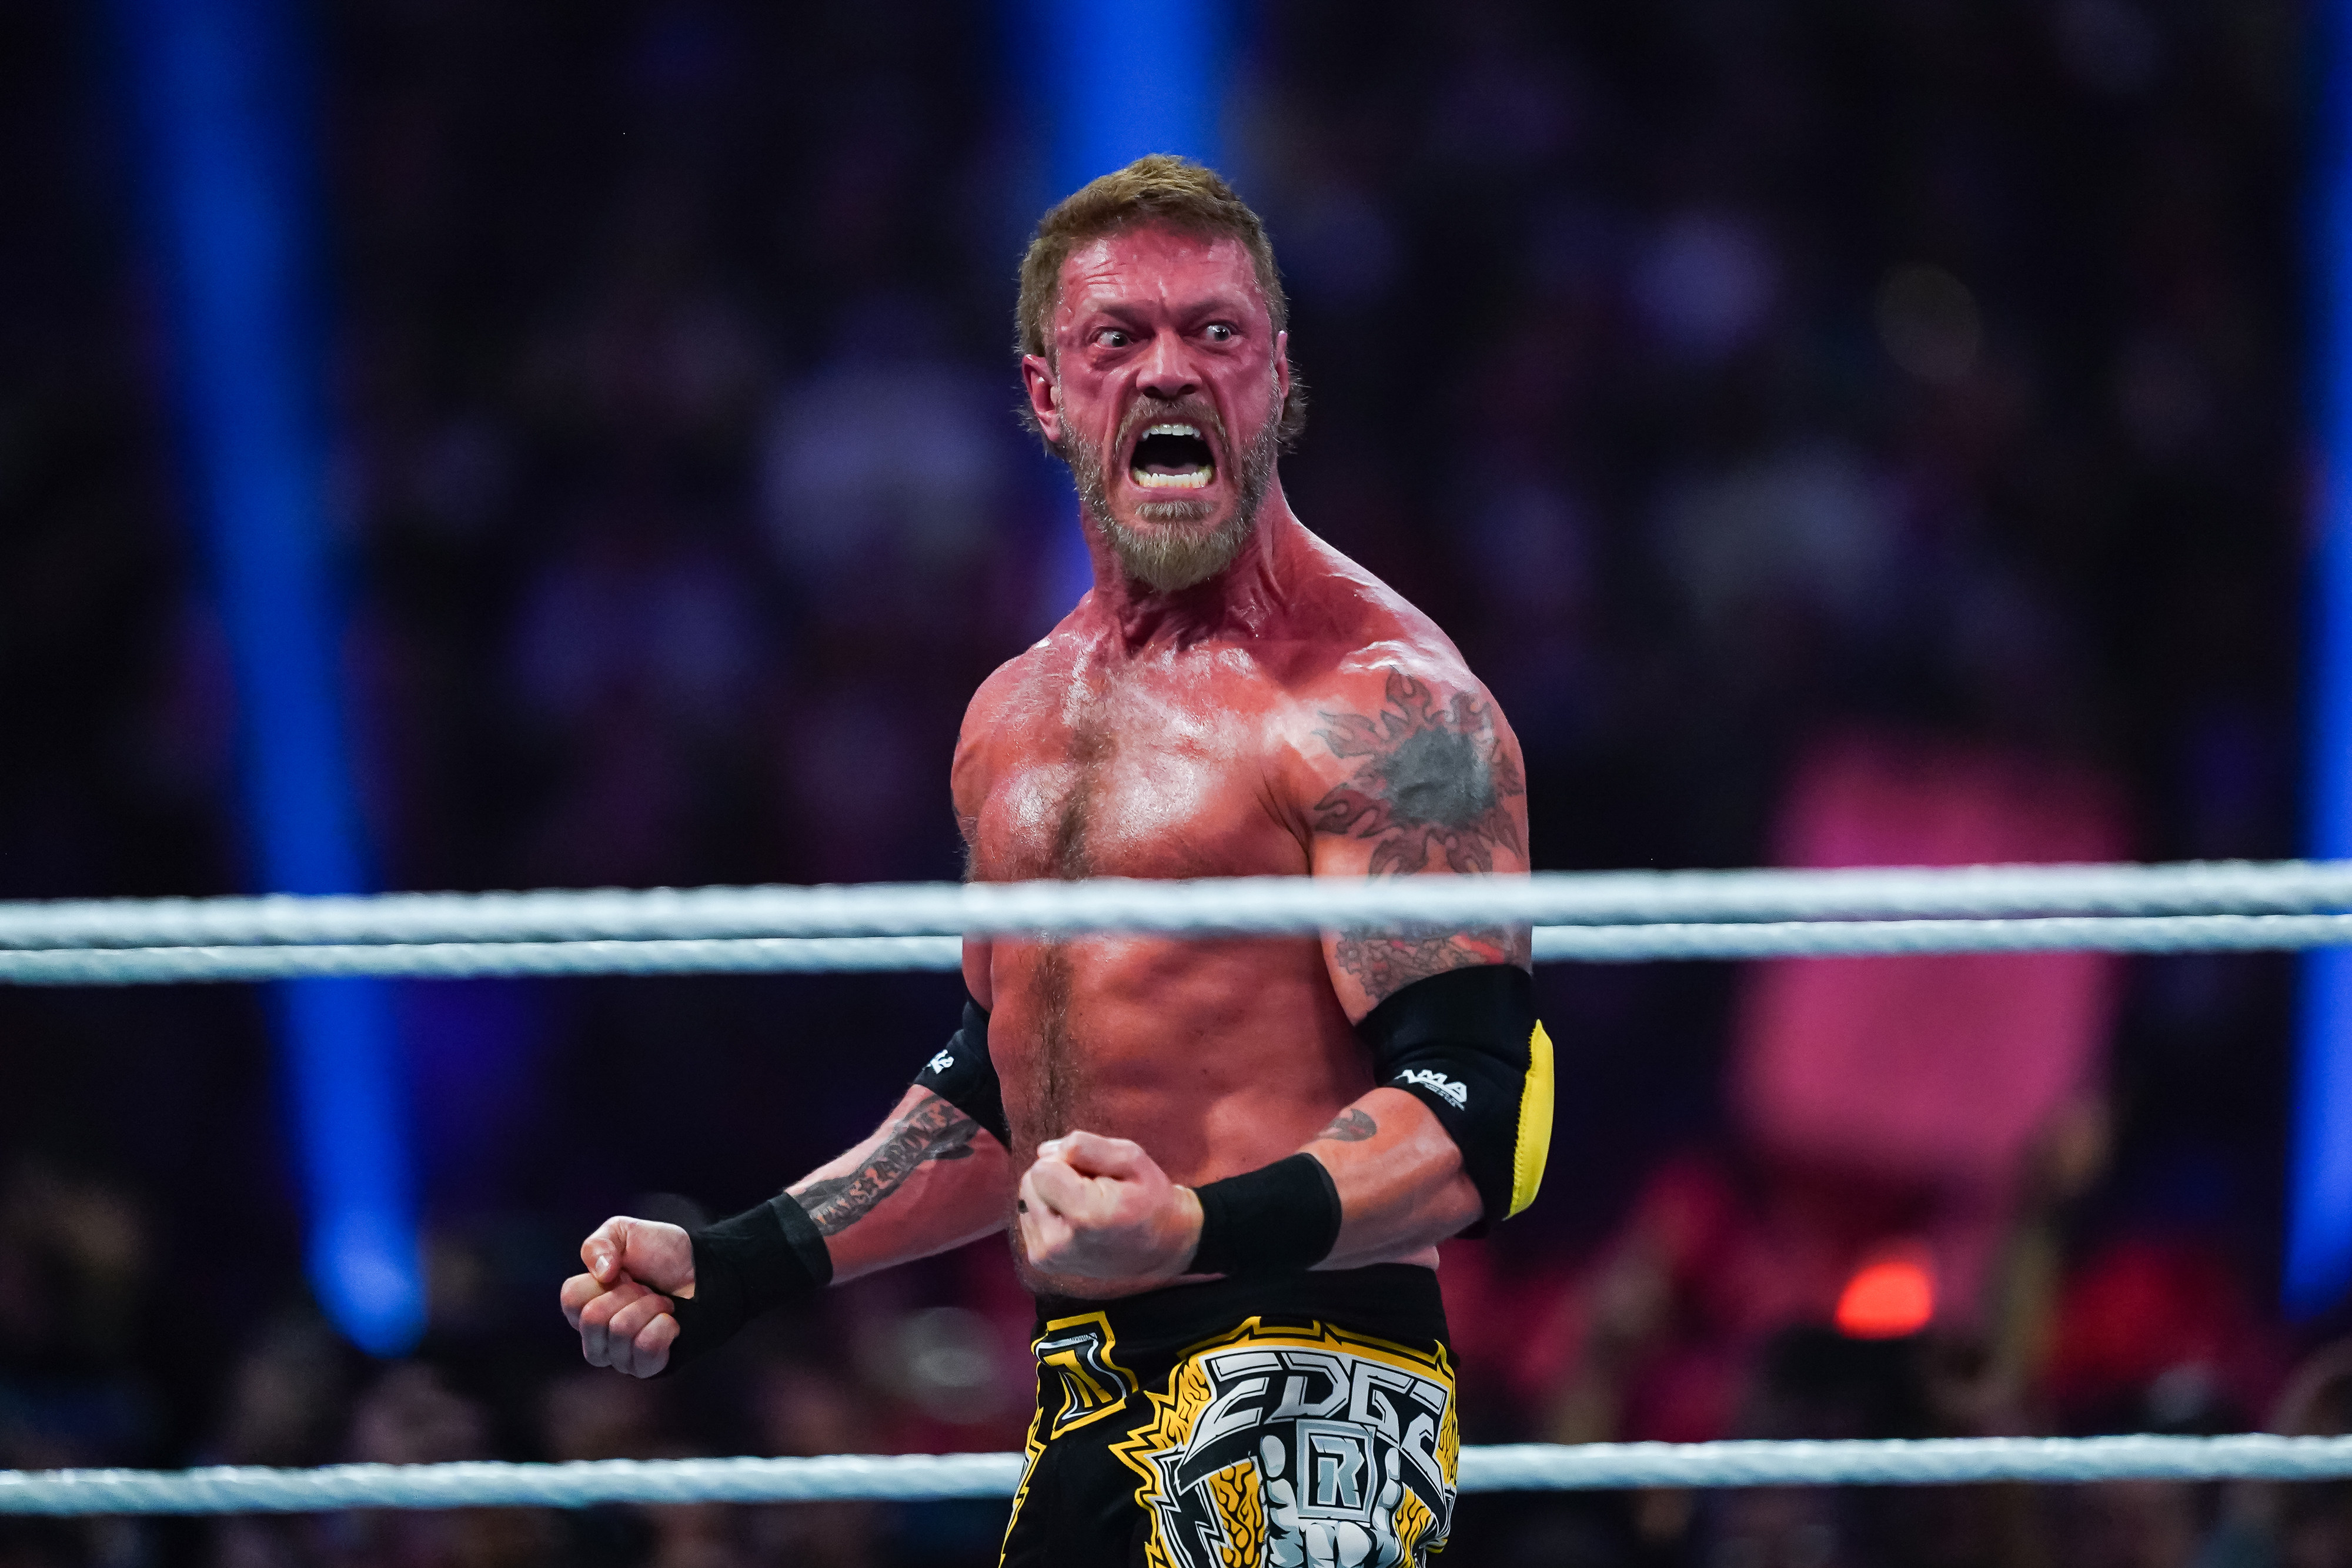 Edge reacts during WWE Royal Rumble at the Alamodome on January 28, 2023 in San Antonio, Texas